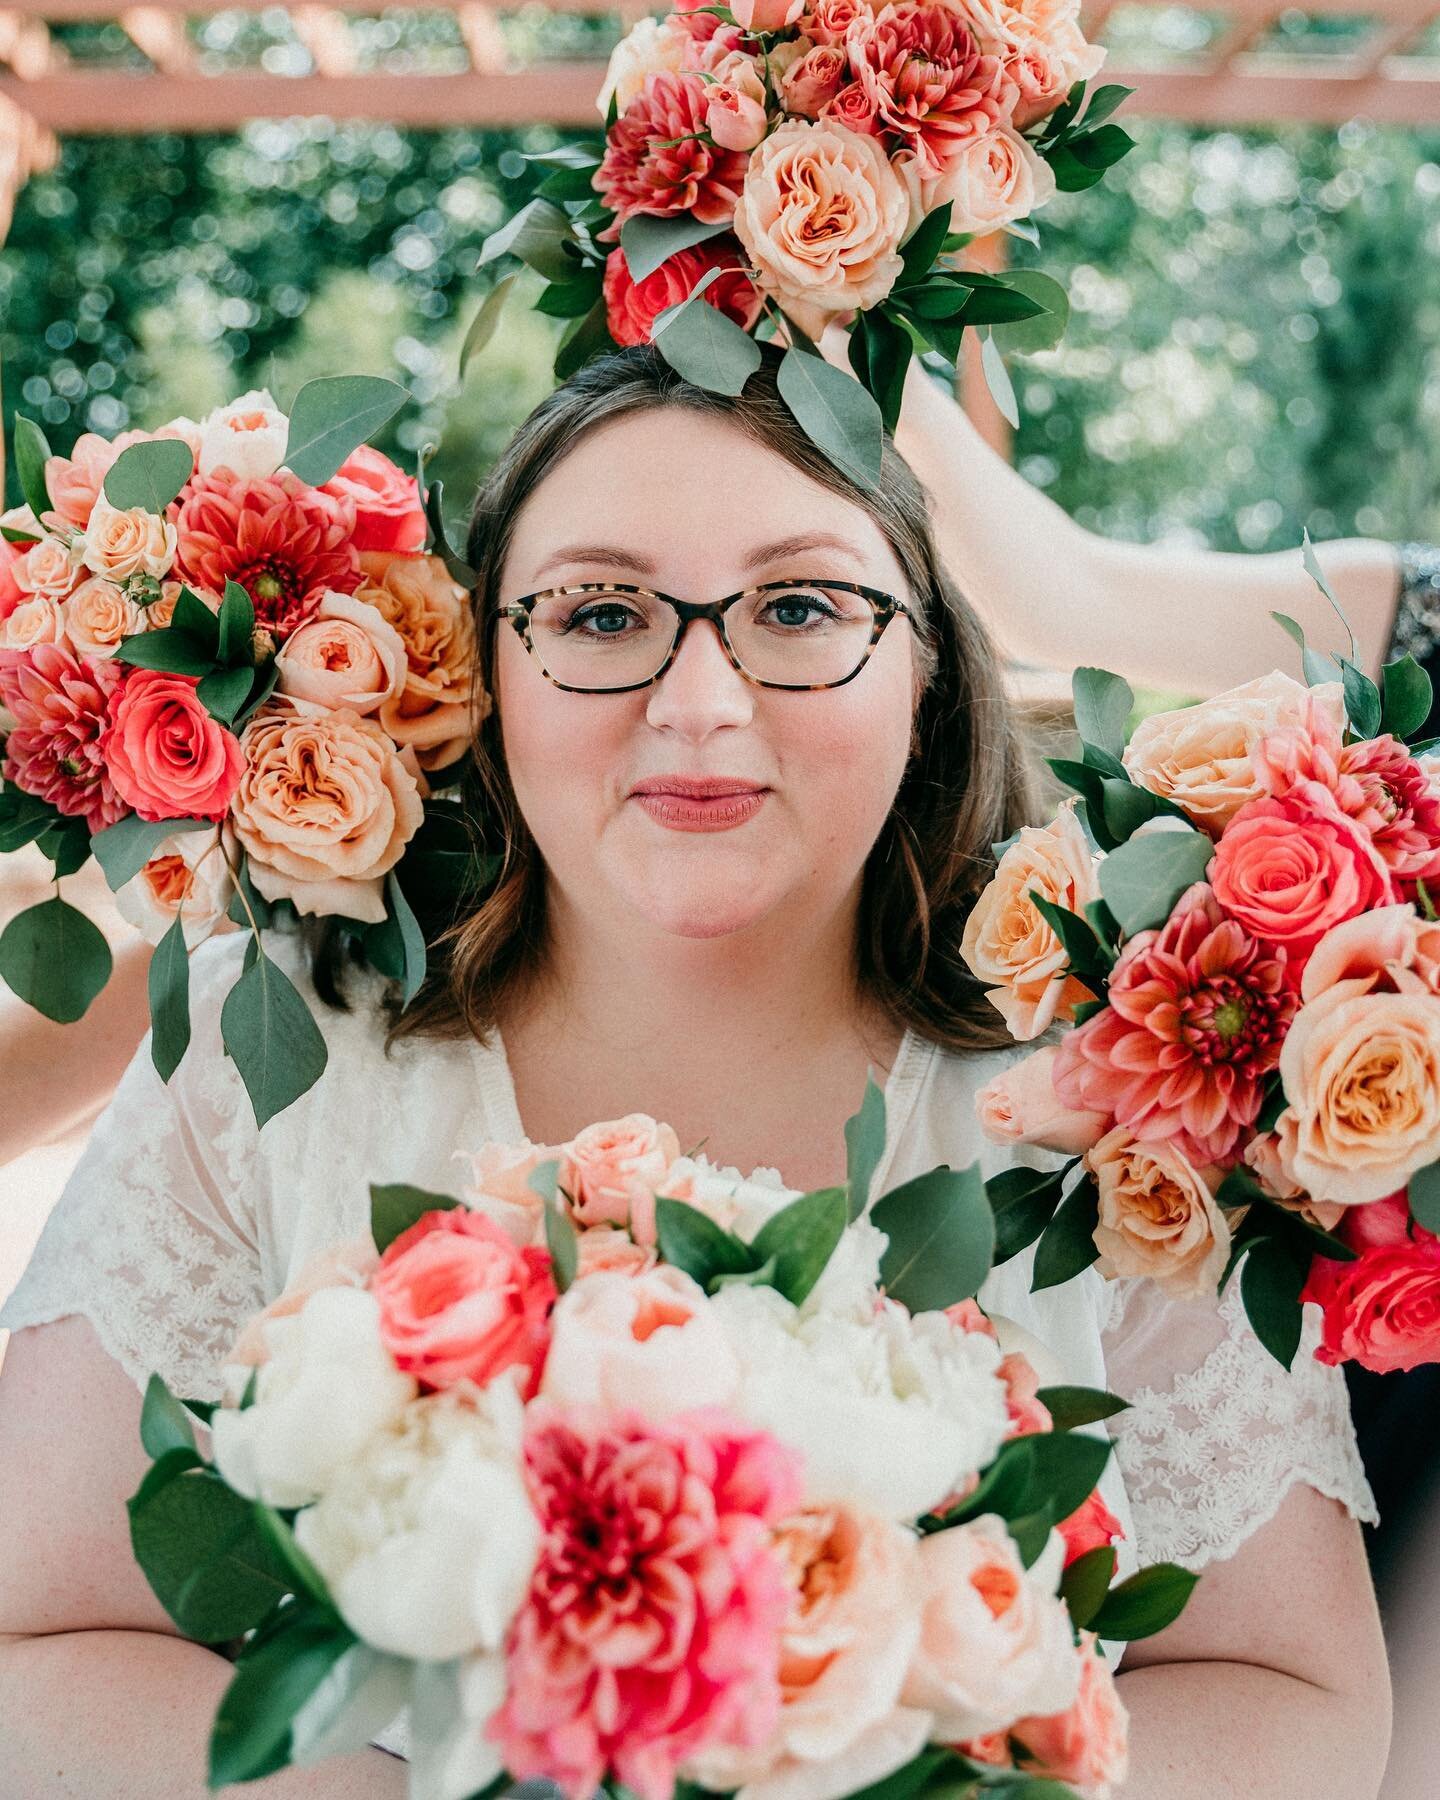 Look at @jessicaleighhilton being super beautiful and lovely and wow, this looks very midsummer doesn&rsquo;t it? 💐 
.
.
.
#omahaweddingphotographer #nebraskaweddingphotographer #omahaengagementphotographer #nebraskaengagementphotographer #chicagowe